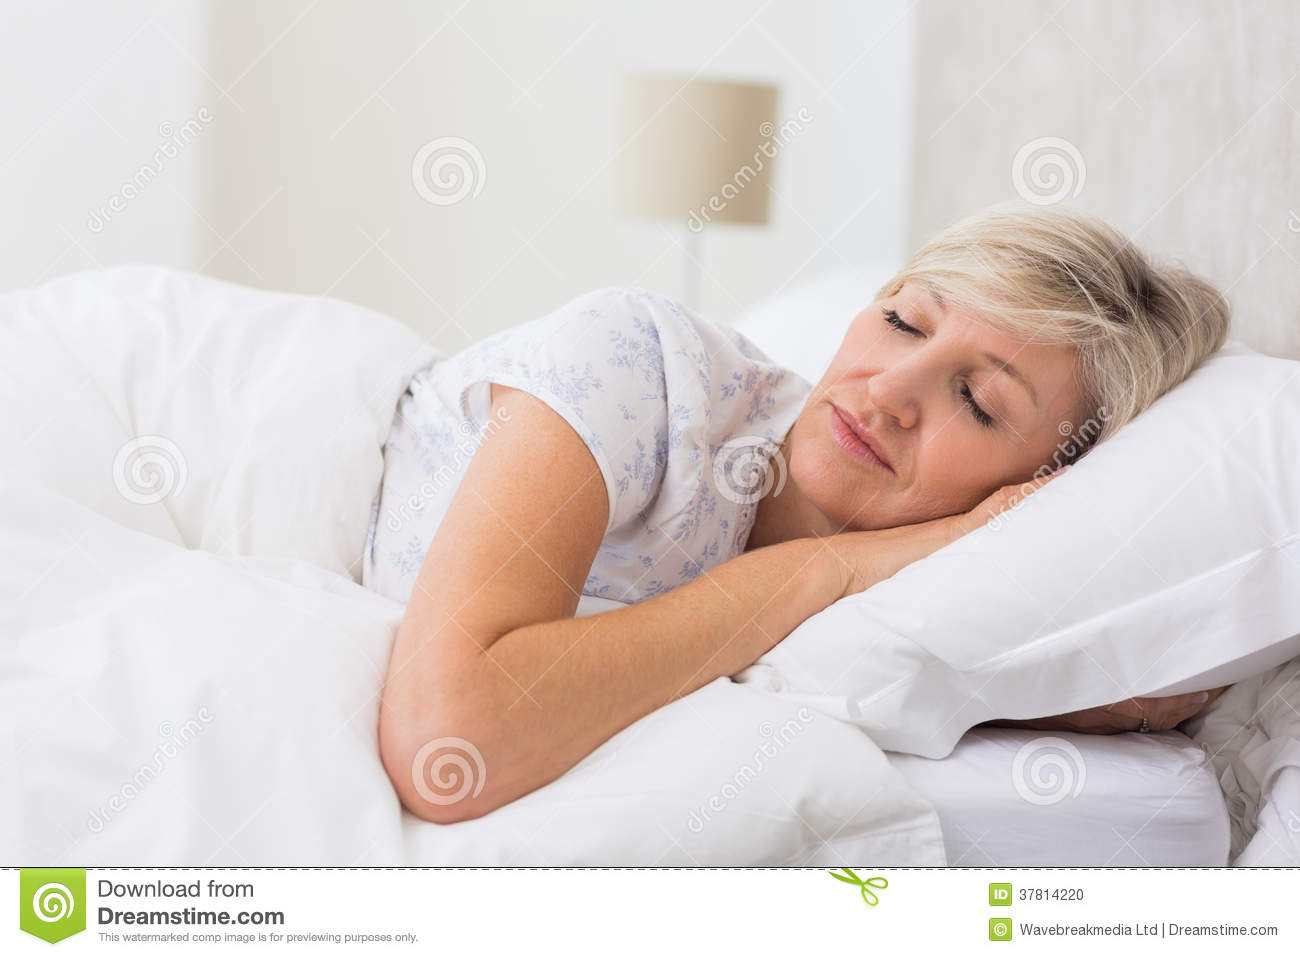 Woman Sleeping With Eyes Closed In Bed Stock Photo   Image  37814220